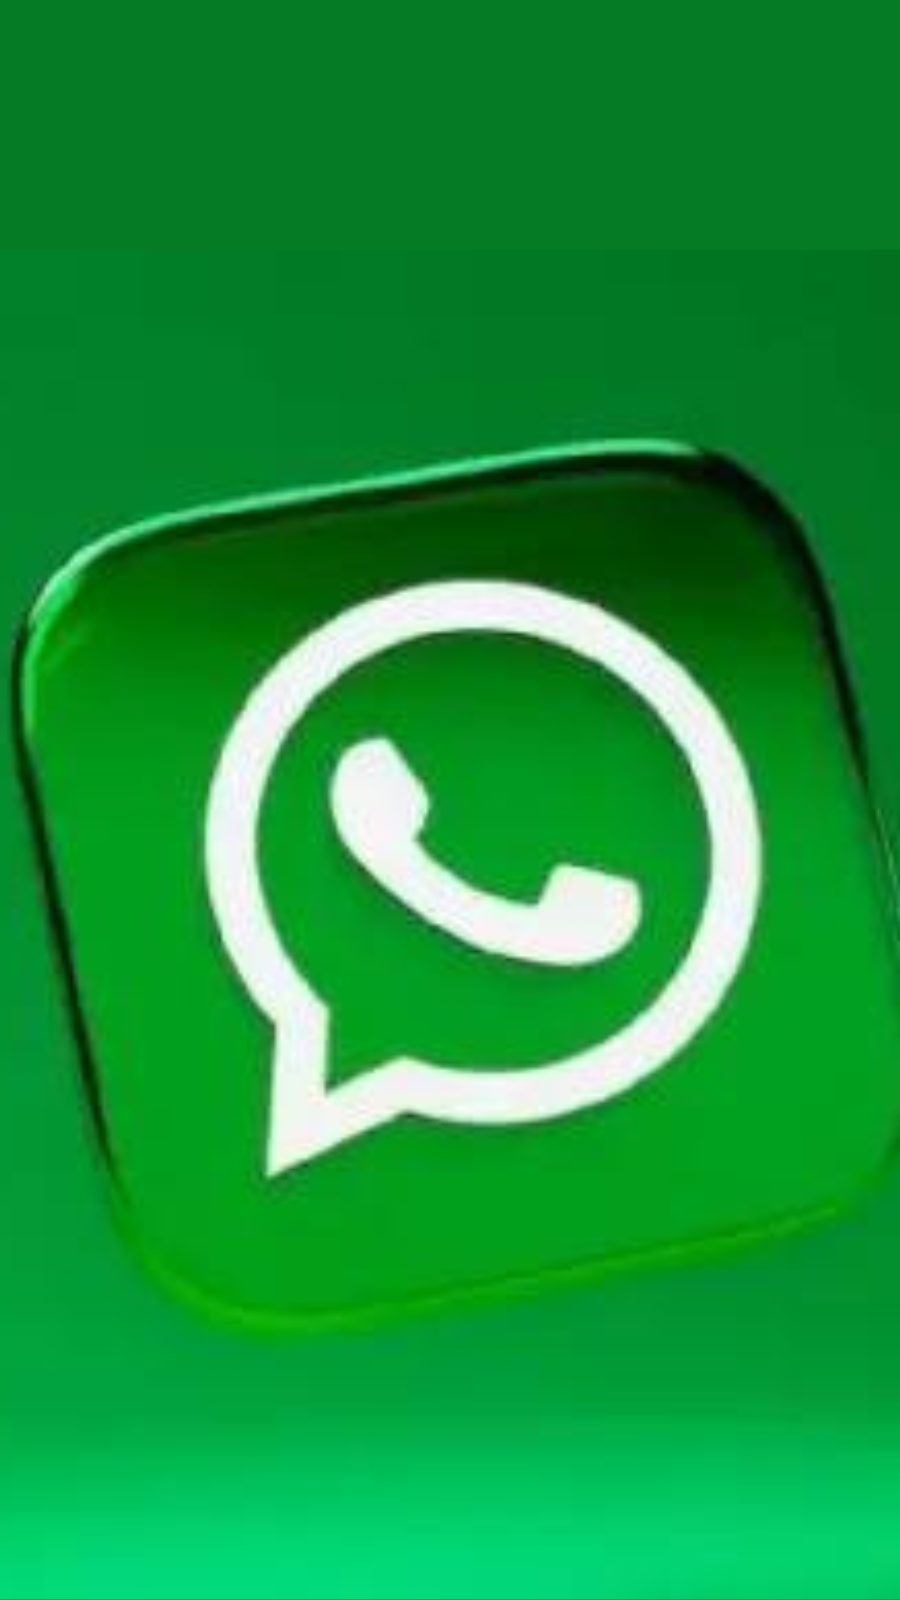 WhatsApp New Feature: WhatsApp Companion Mode lets you chat on 4 ...